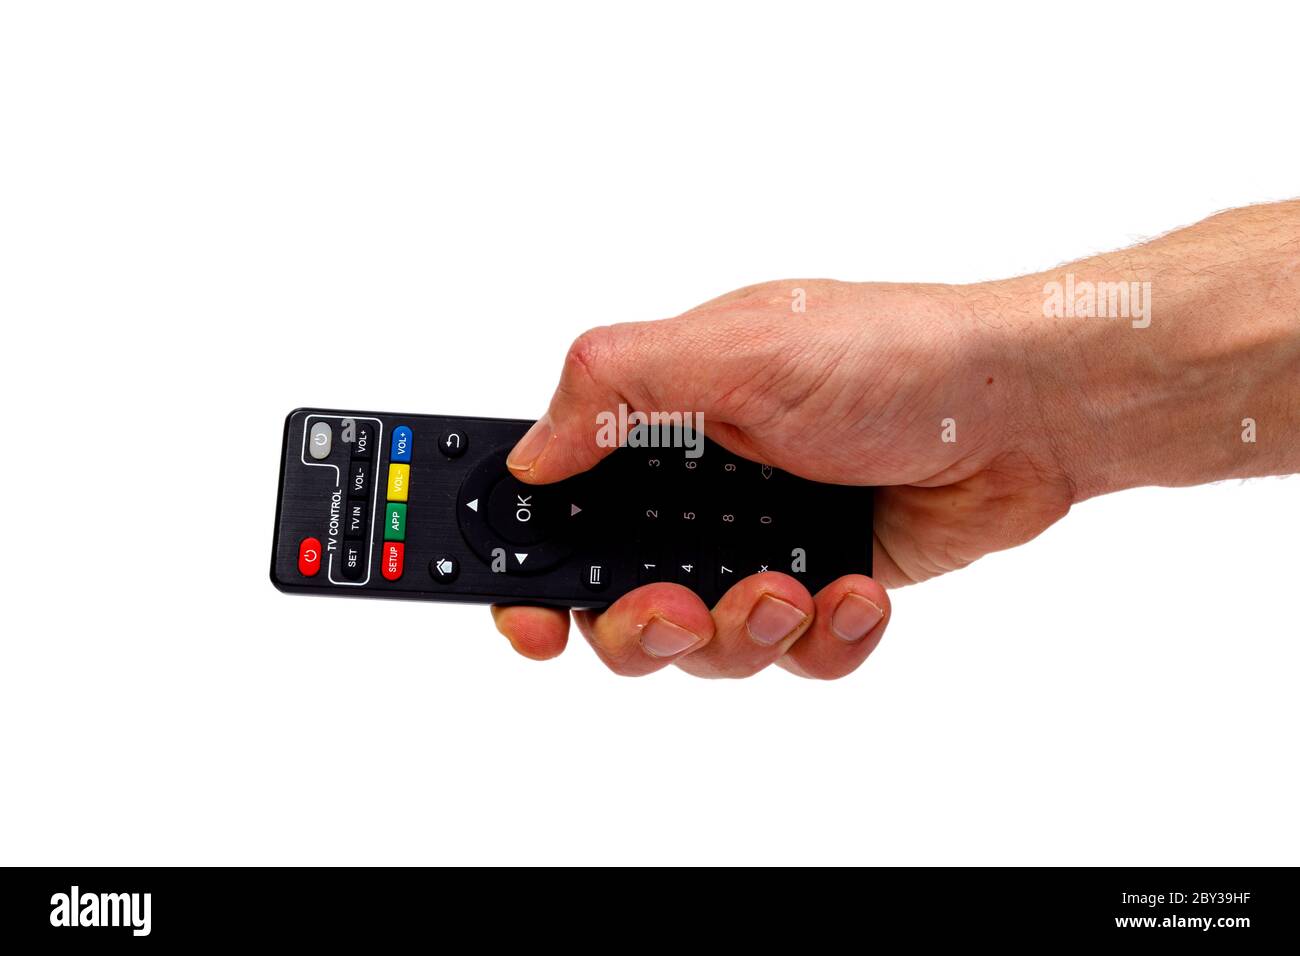 Male hand holding tv remote isolated on white background. Minimalistic concept. Stock Photo